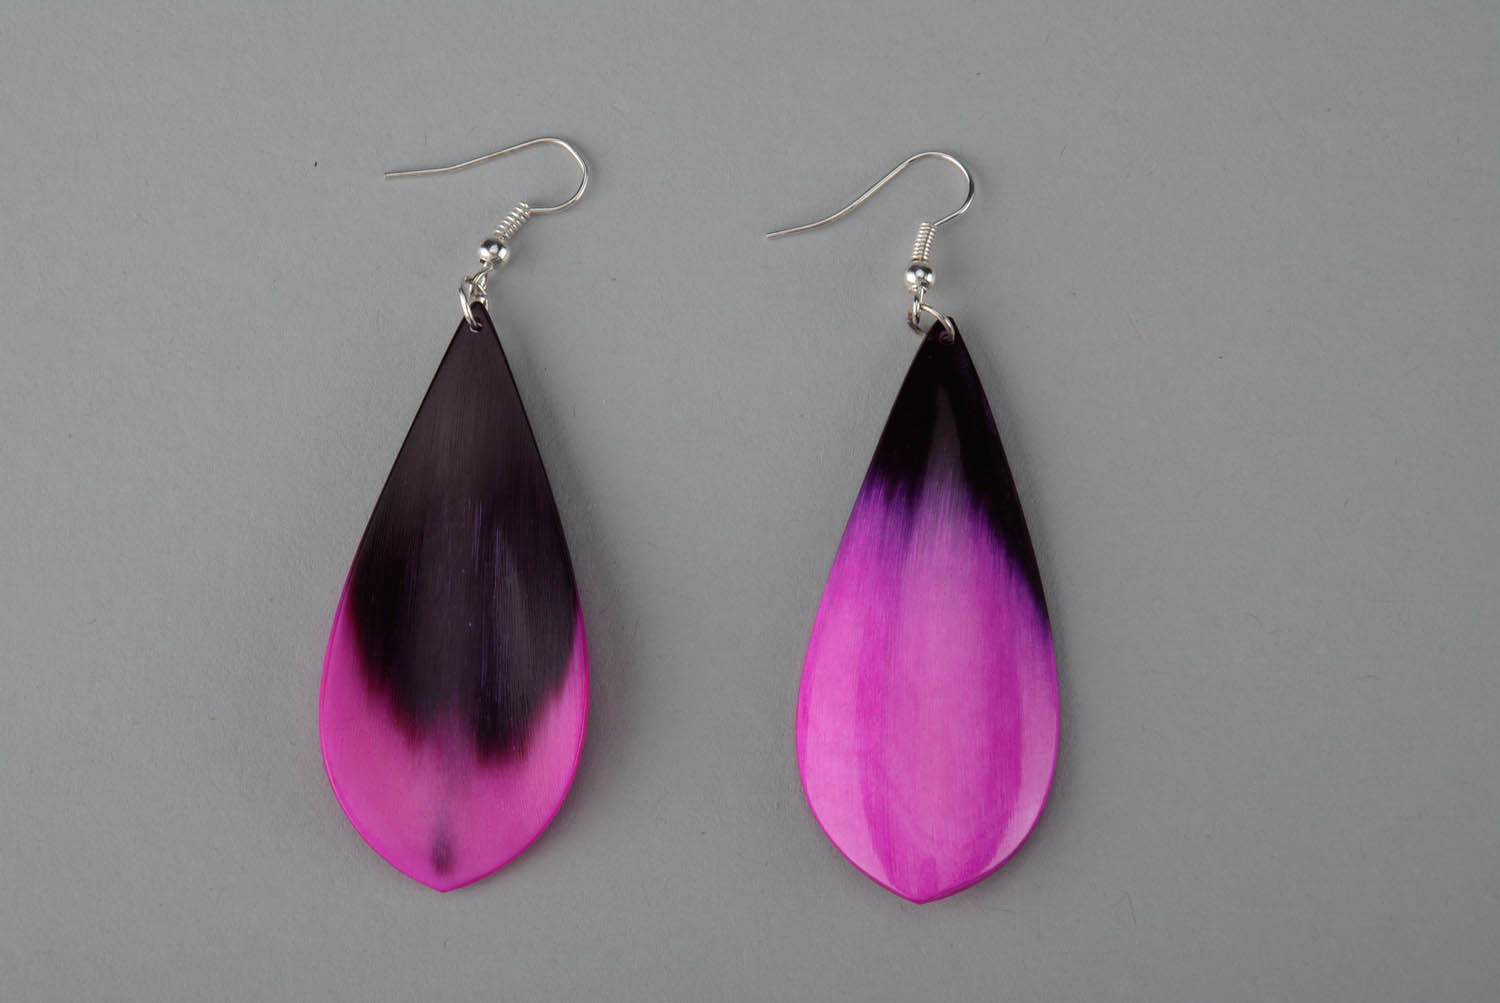 Petals earrings made of horn photo 1